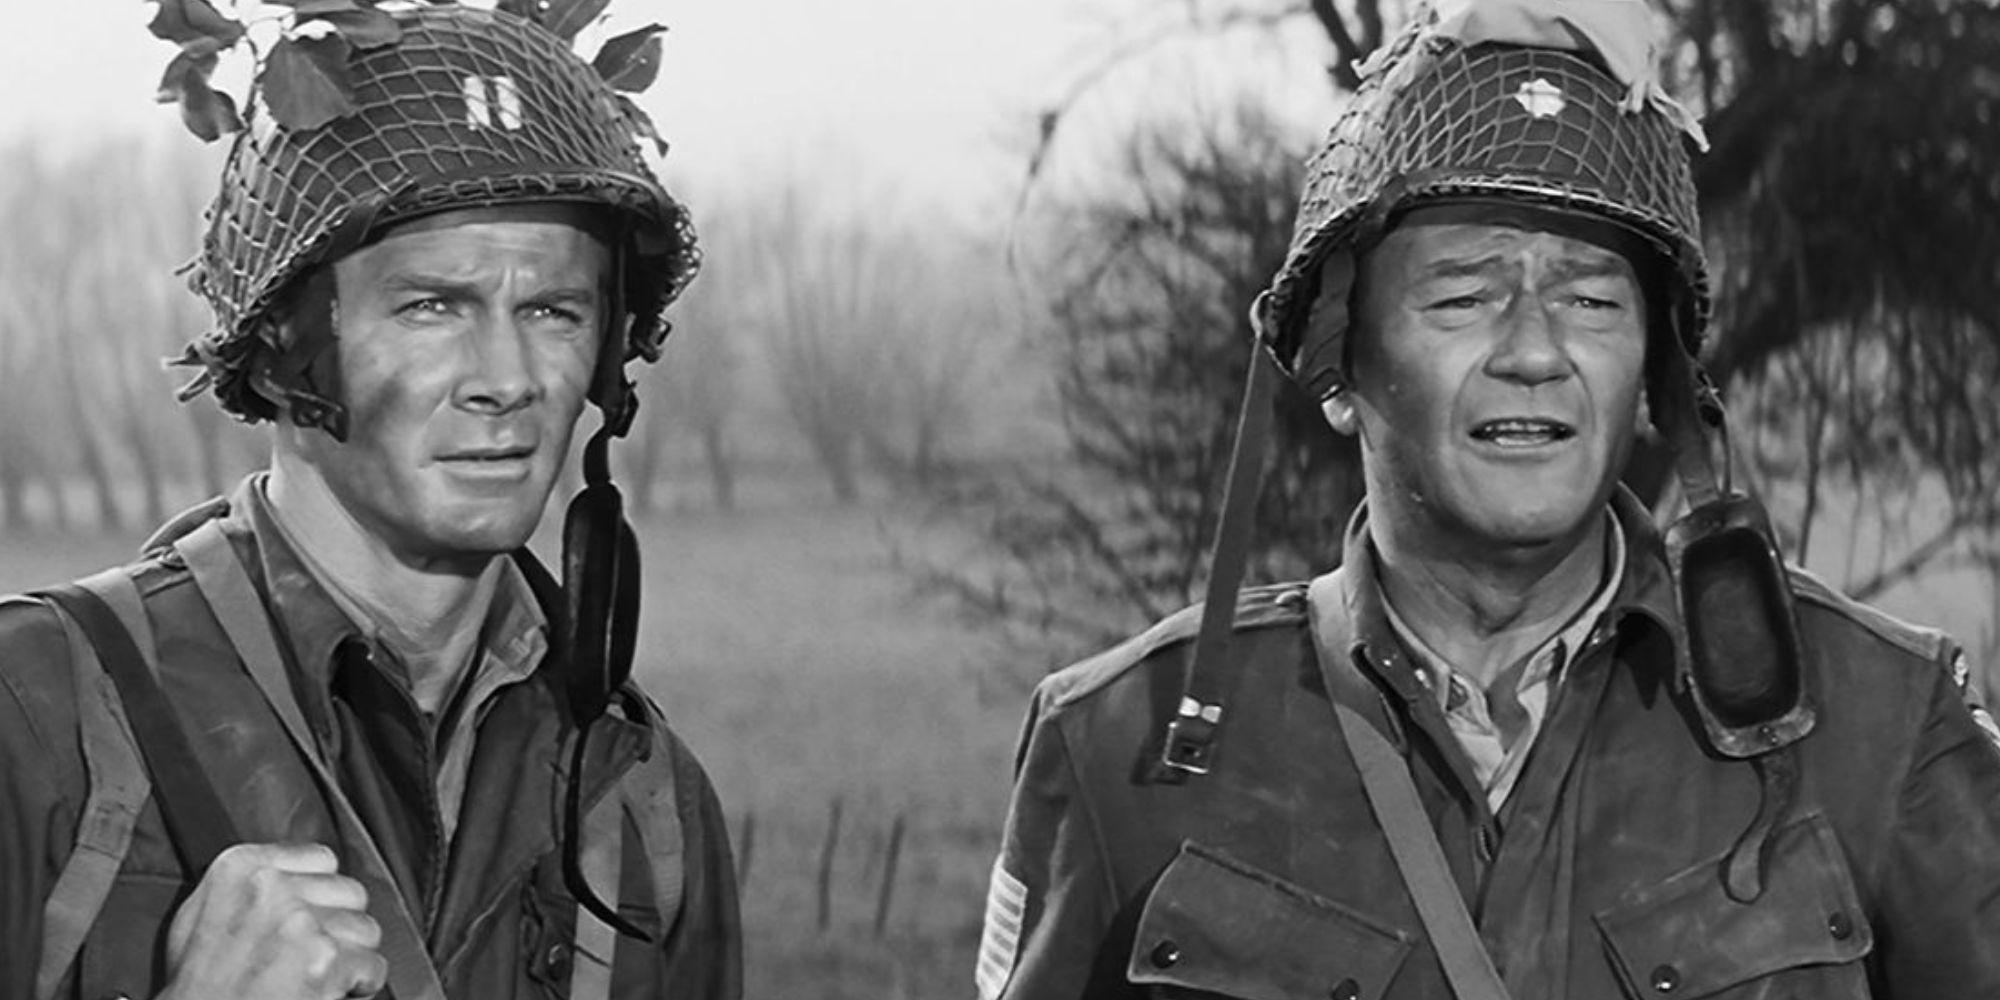 John Wayne standing next to another soldier in The Longest Day